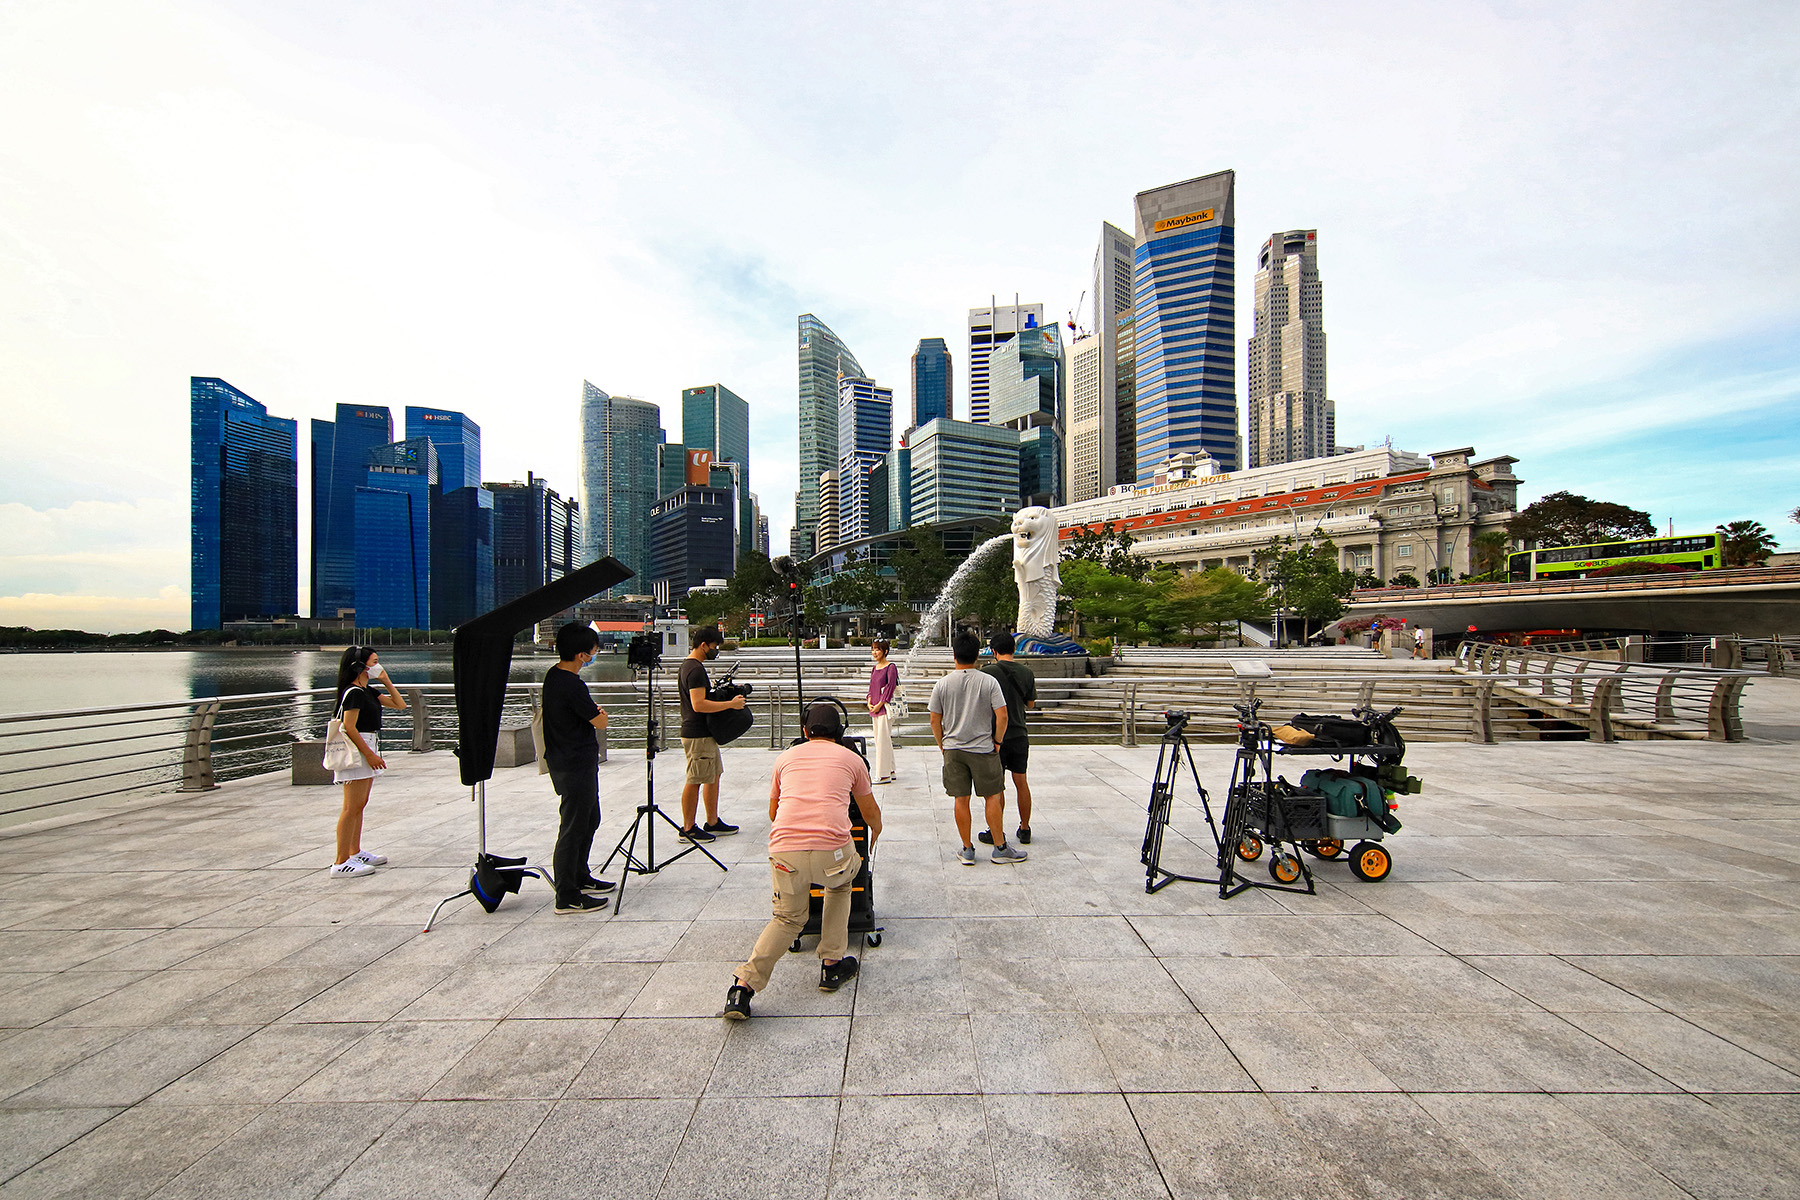 A film crew on location at Merlion Park in Singapore - they do not need work visas